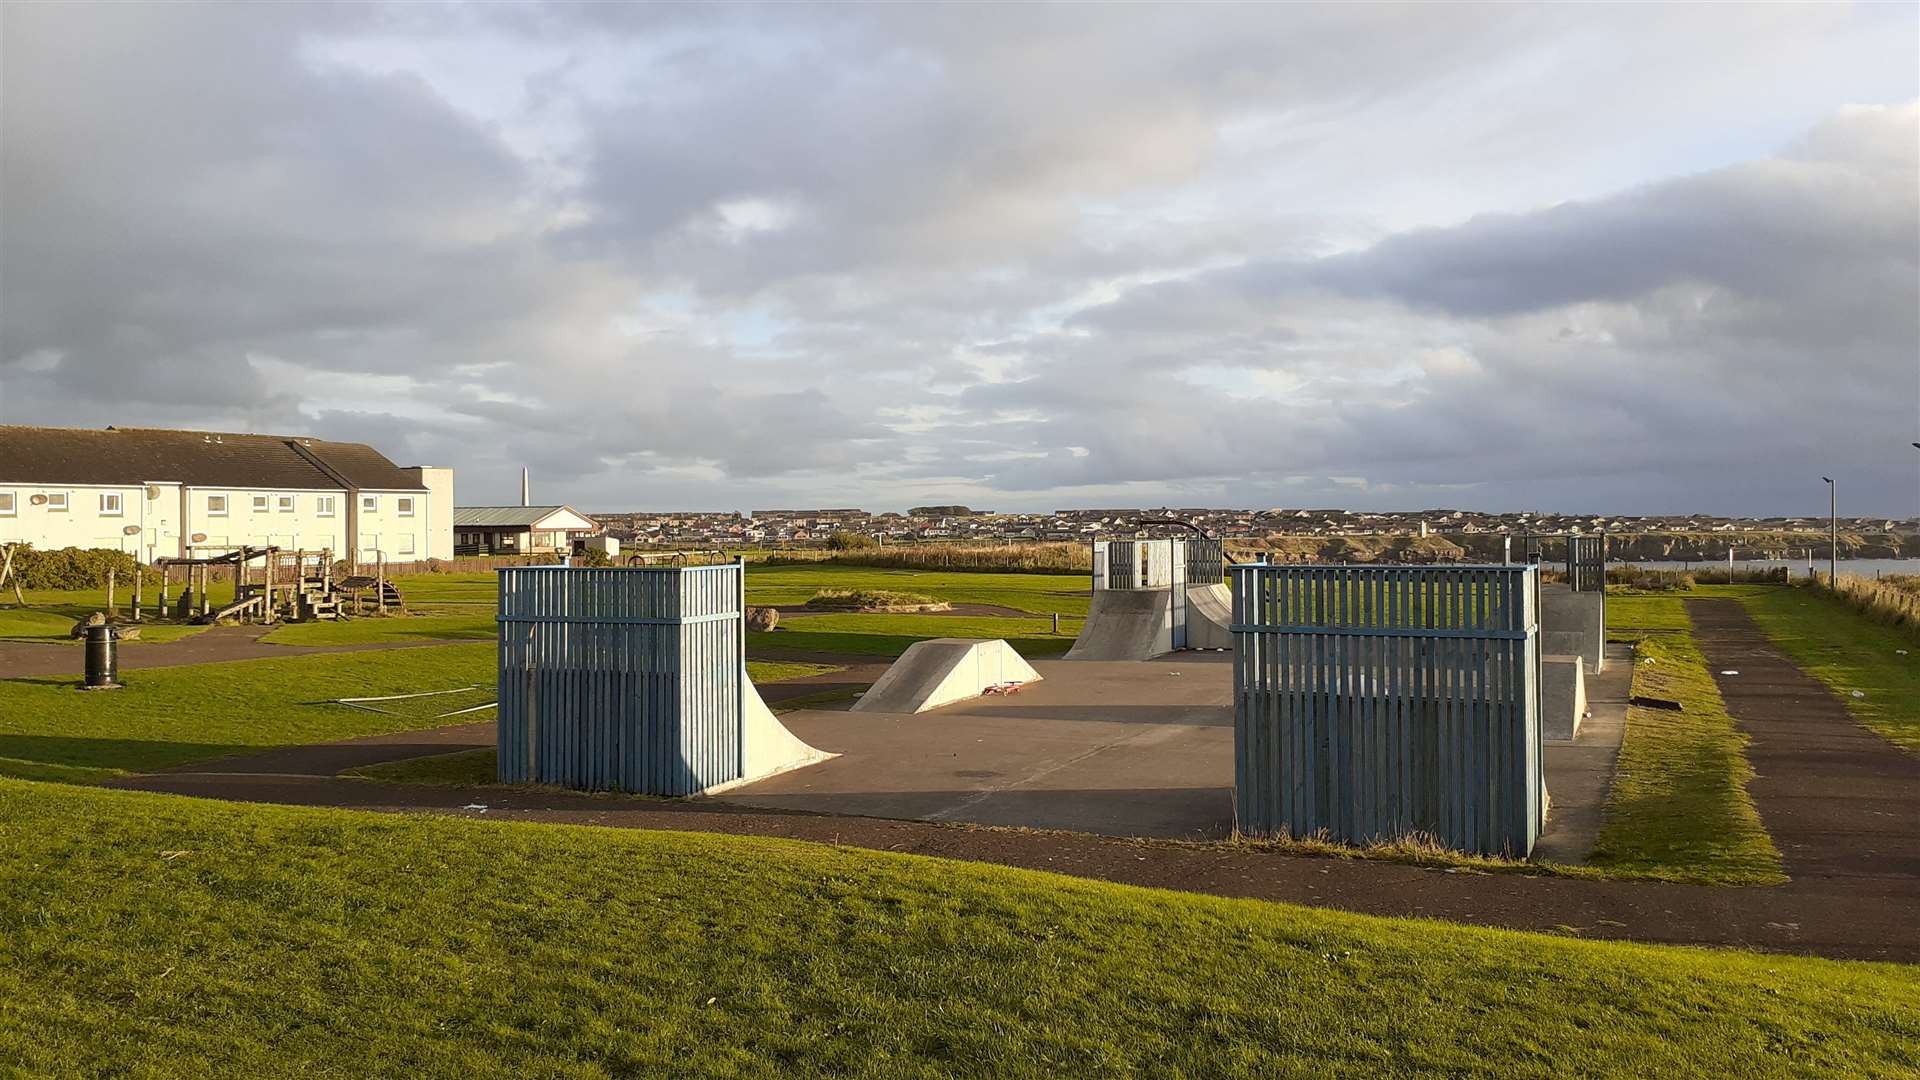 The popular park features a skateboard area and a range of other play equipment.